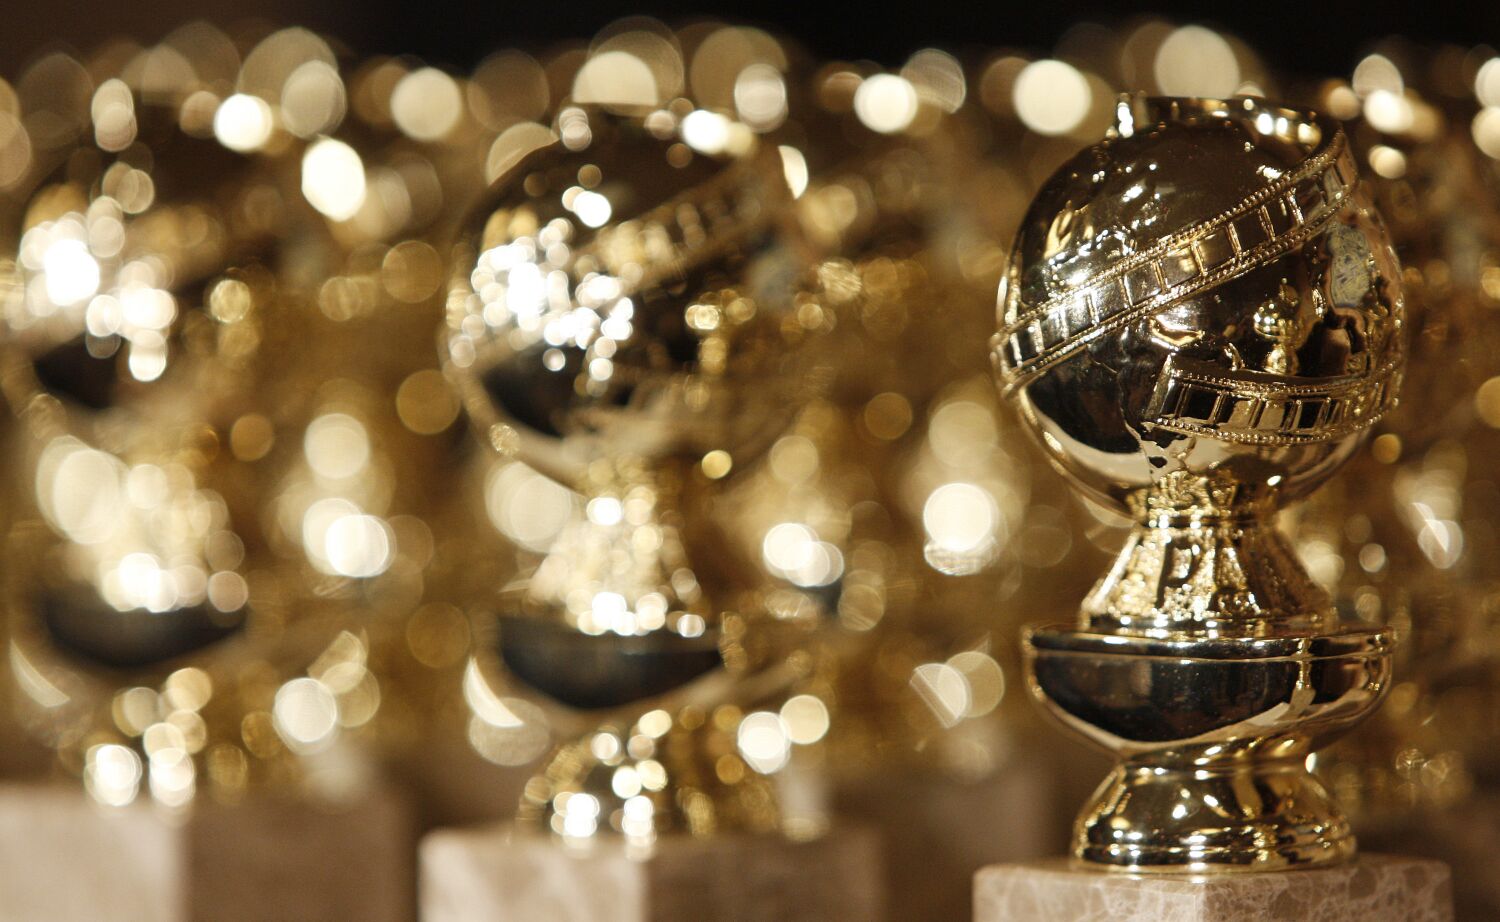 Golden Globe Awards returns to TV after a hiatus. Here's what to know about the show